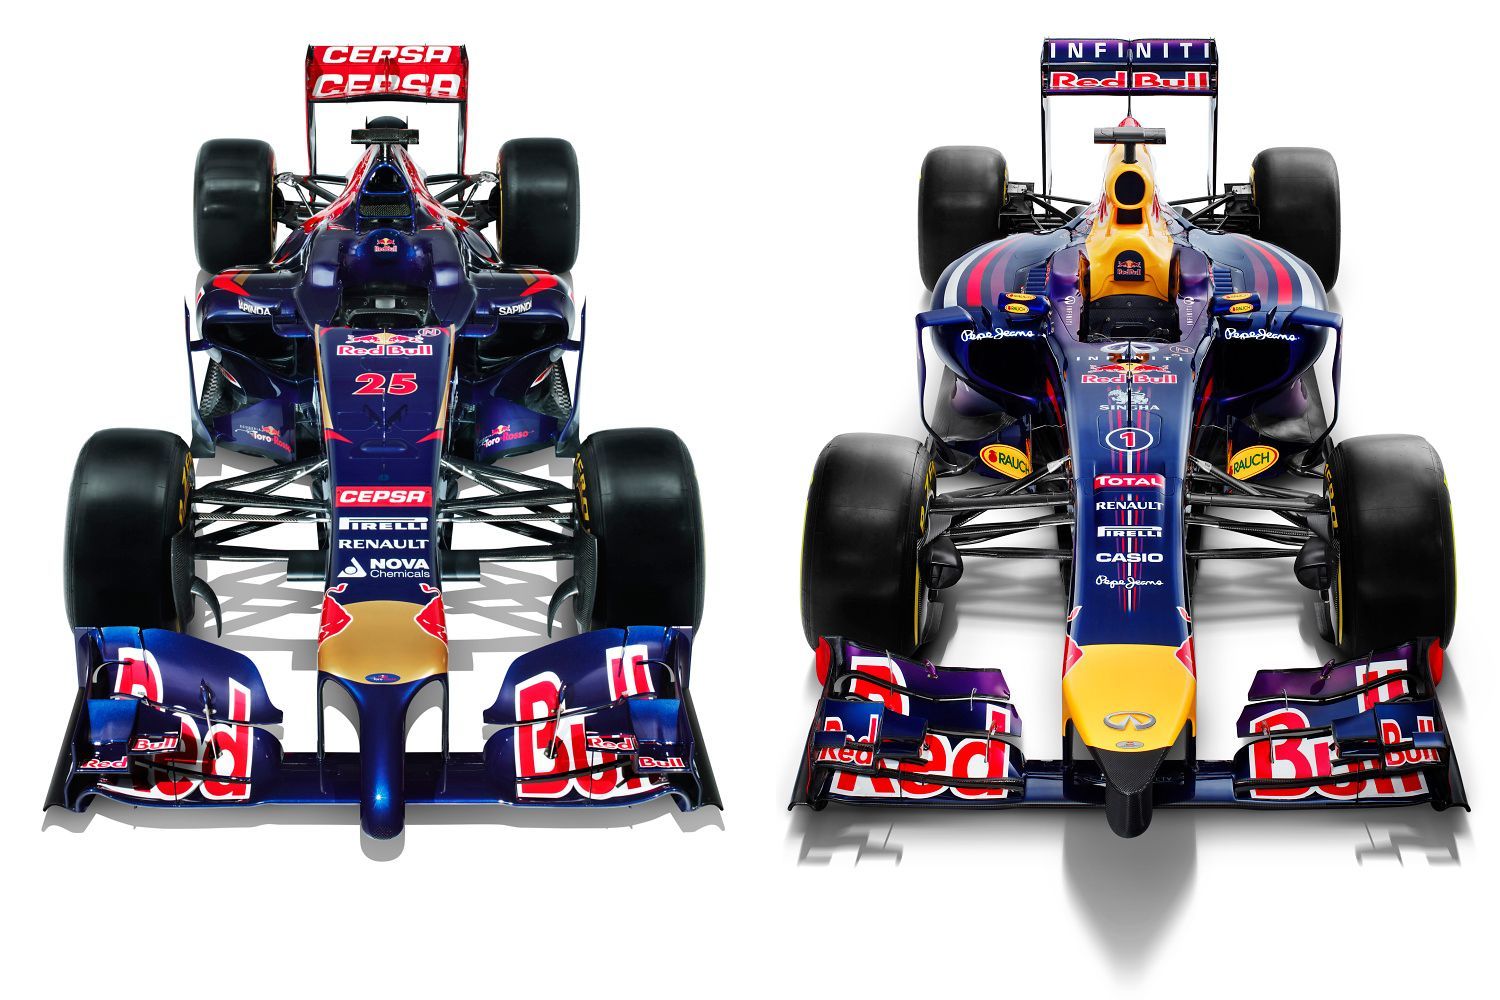 F1: Red Bull RB10 a RB09